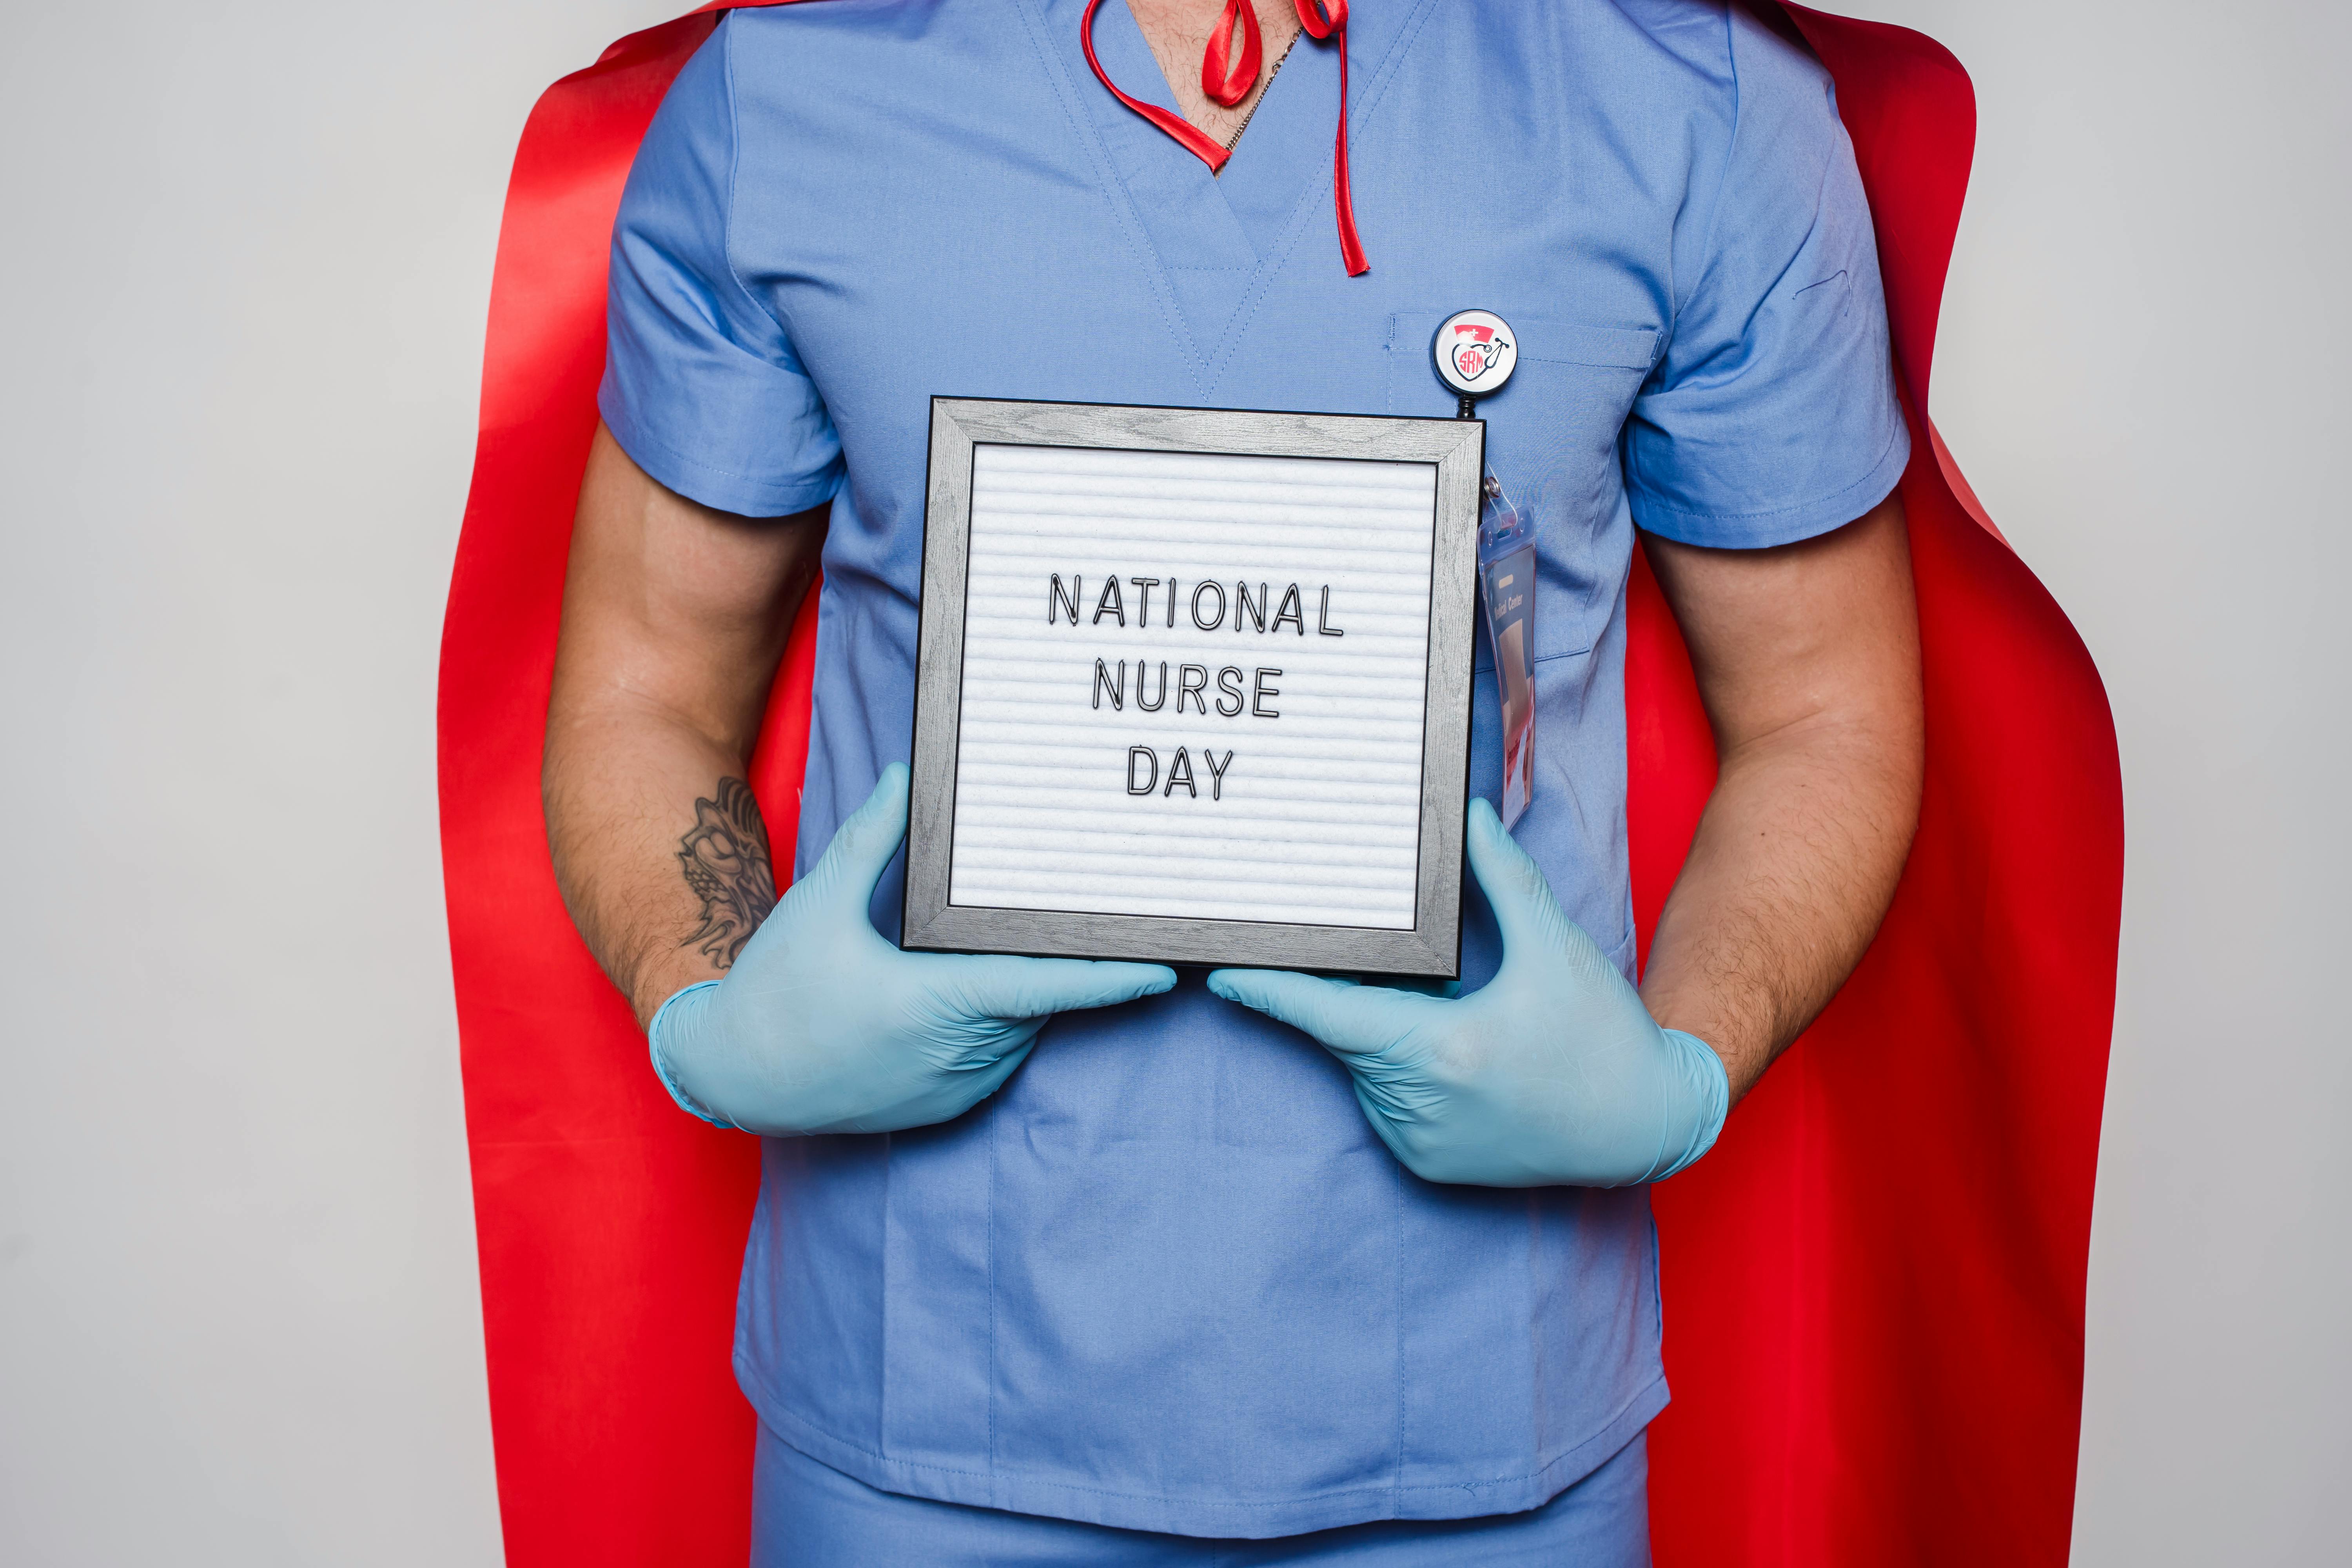 A man in a doctor's uniform holds a frame with the inscription NATIONAL NURSE DAY